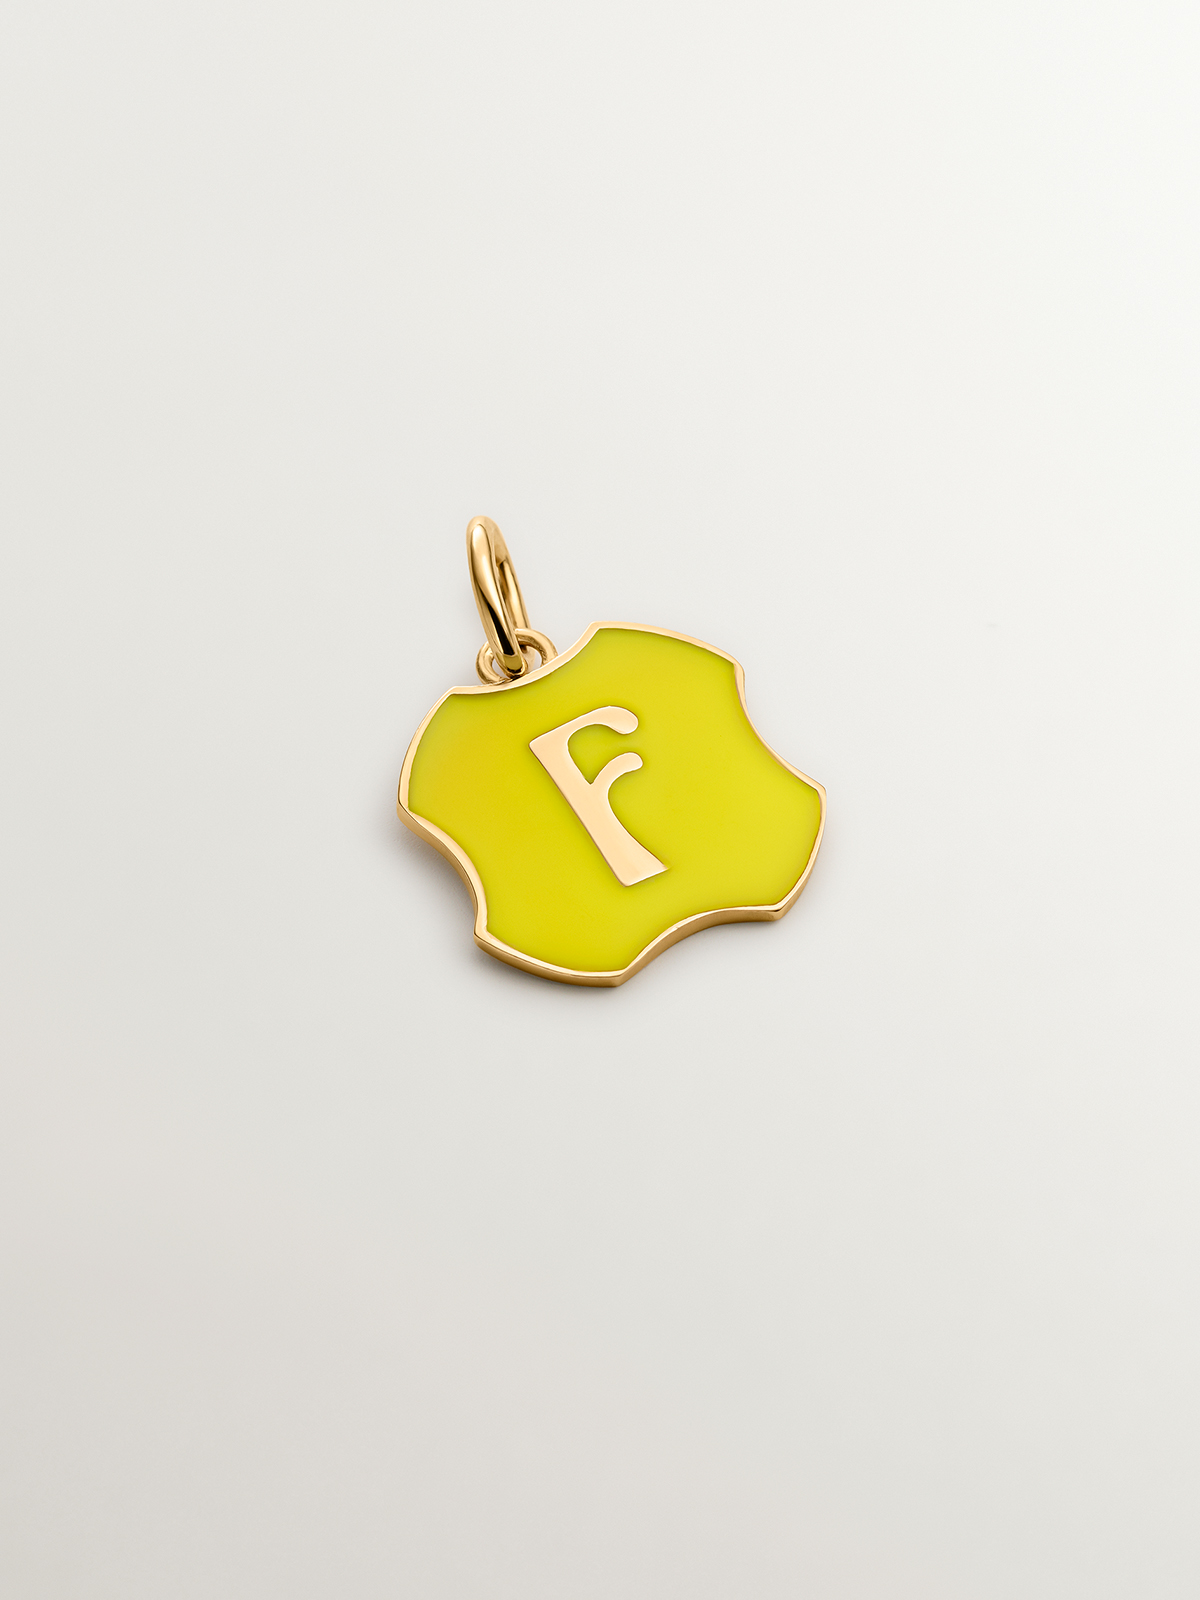 Charm in 925 sterling silver plated in 18K yellow gold with initial F and yellow enamel with irregular shape